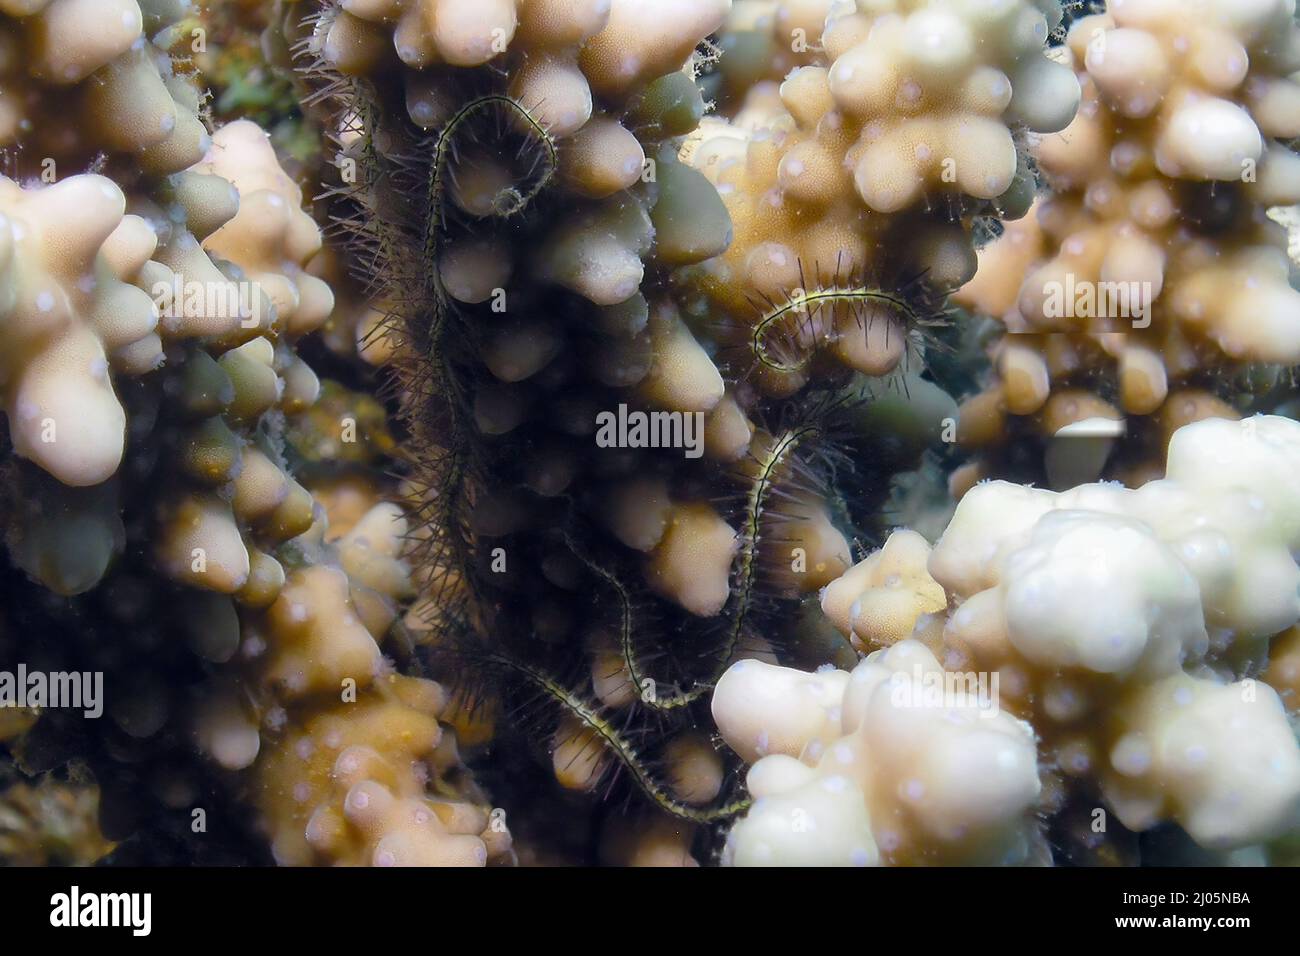 A Brittle Sea Star (Ophiuroidea sp.) in the Red Sea Stock Photo